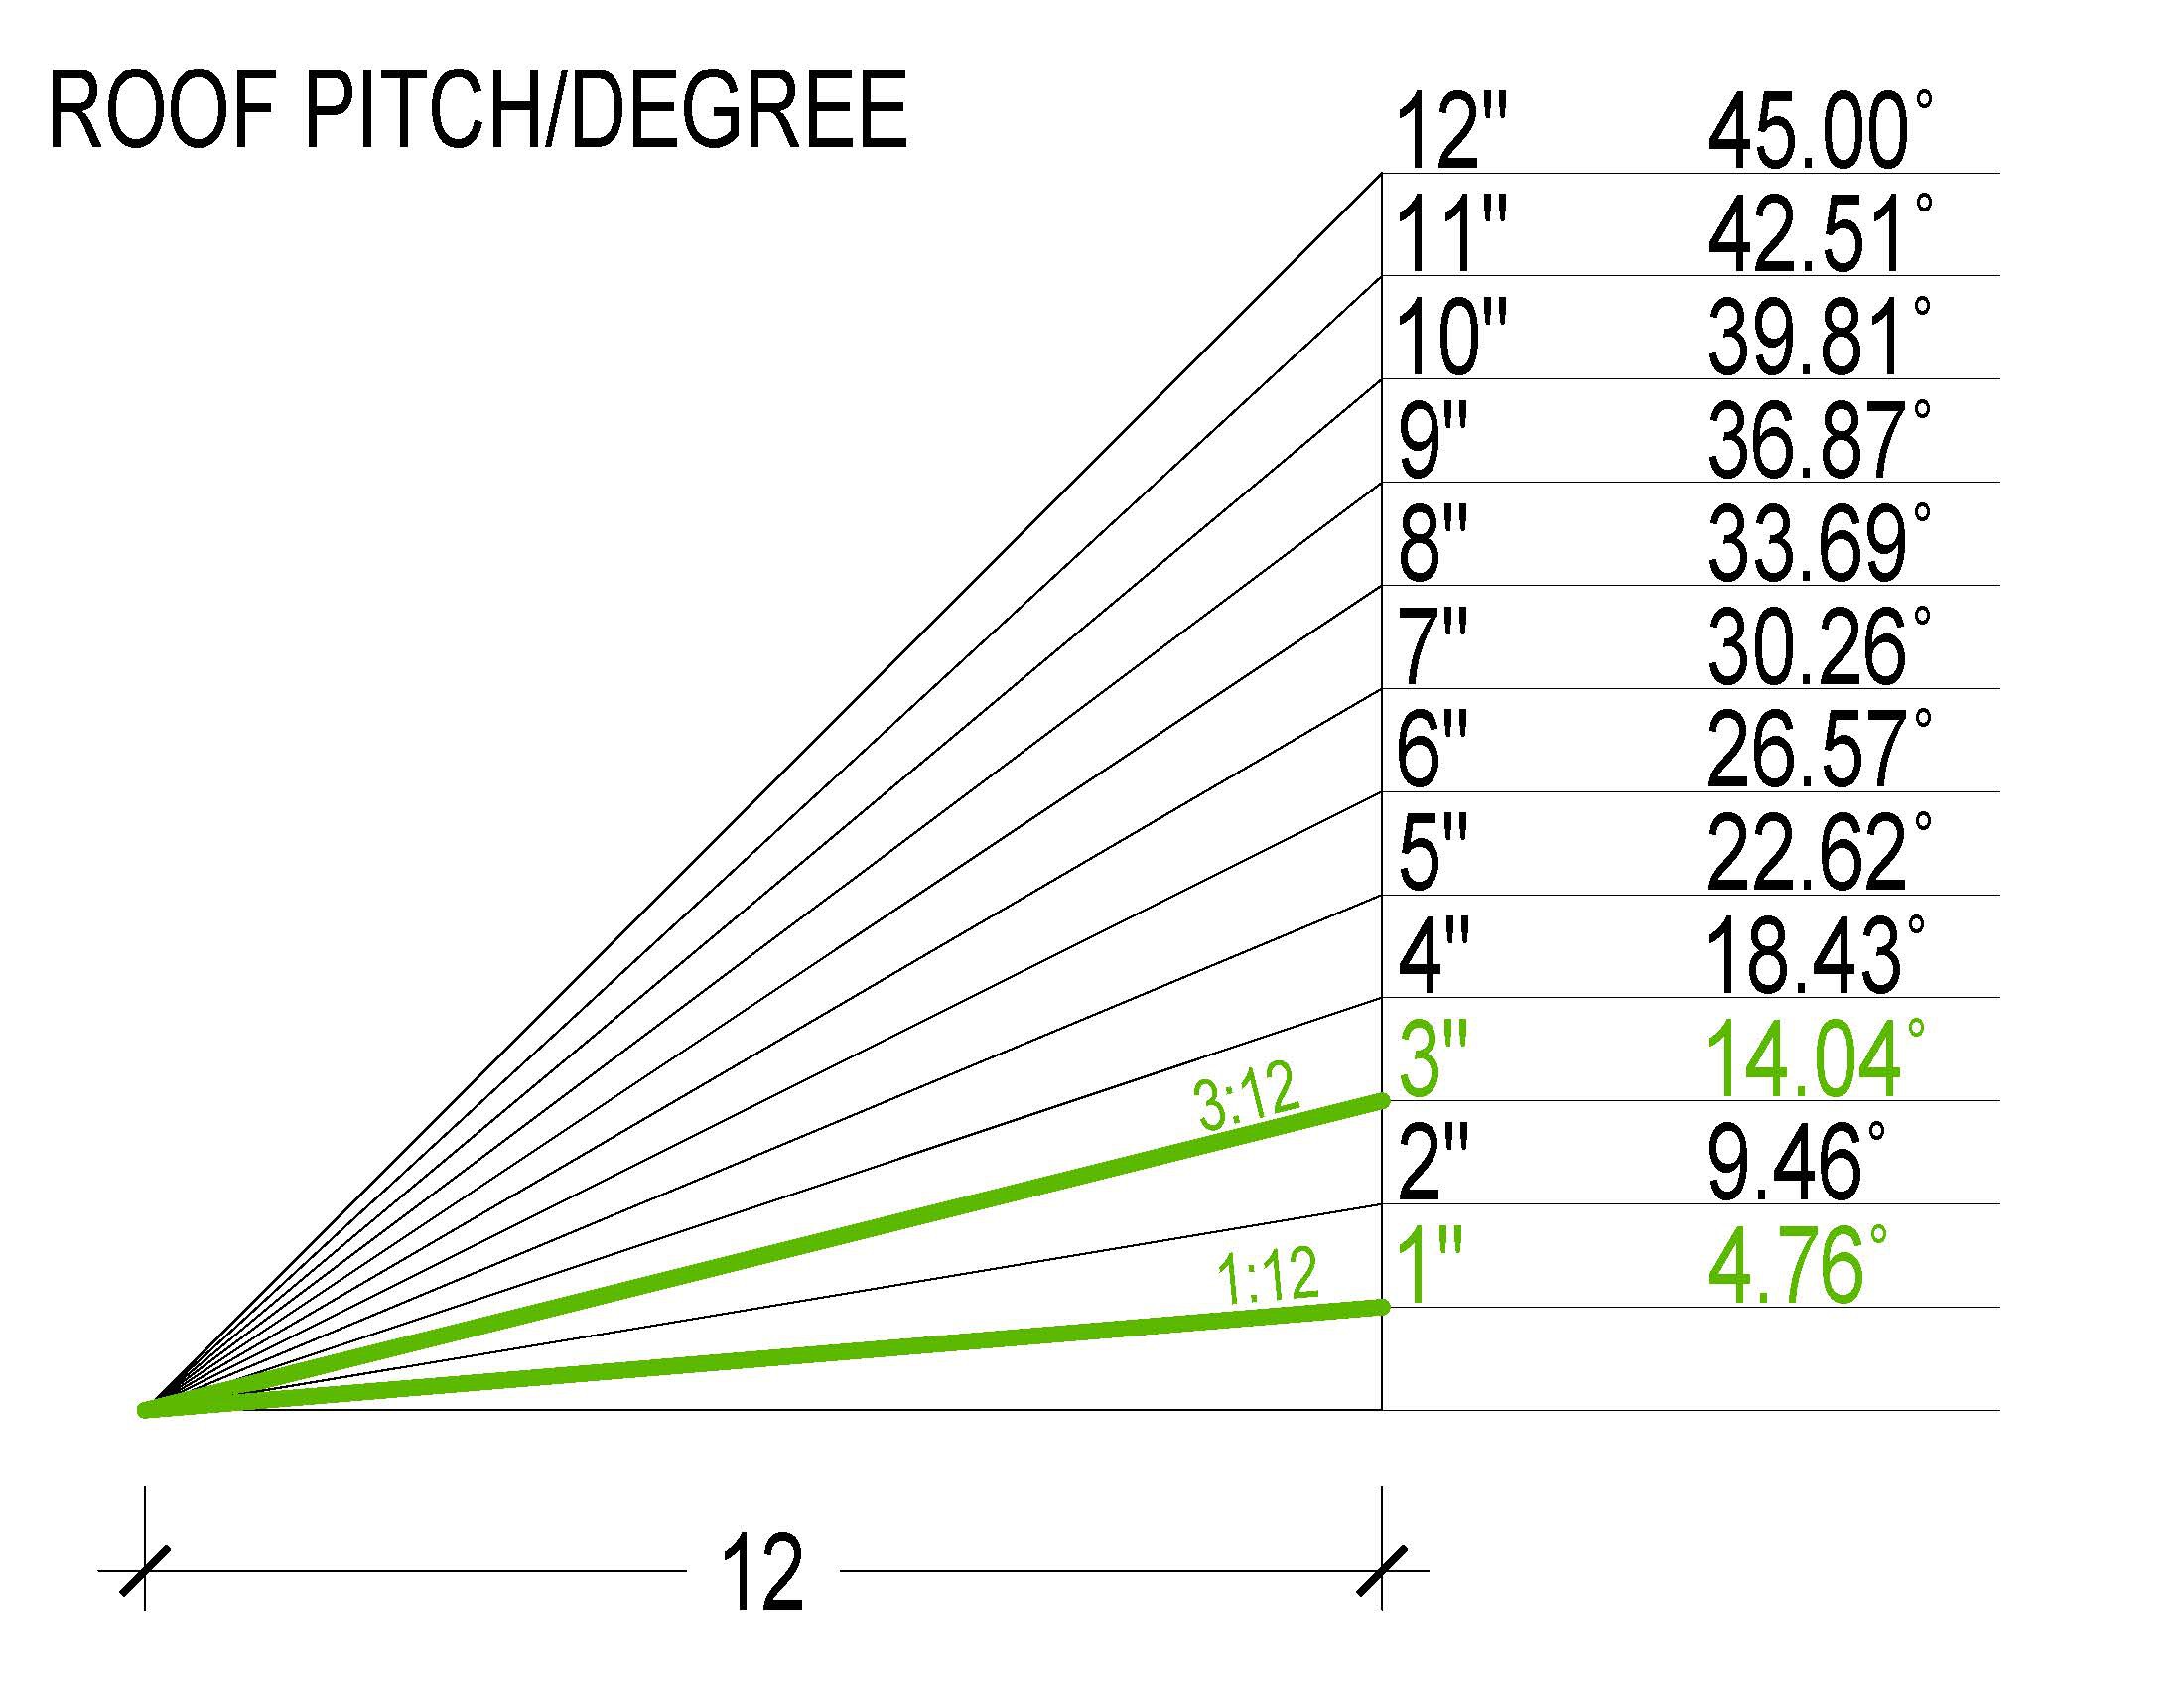 Pitch Modification - 1/12 to 3/12